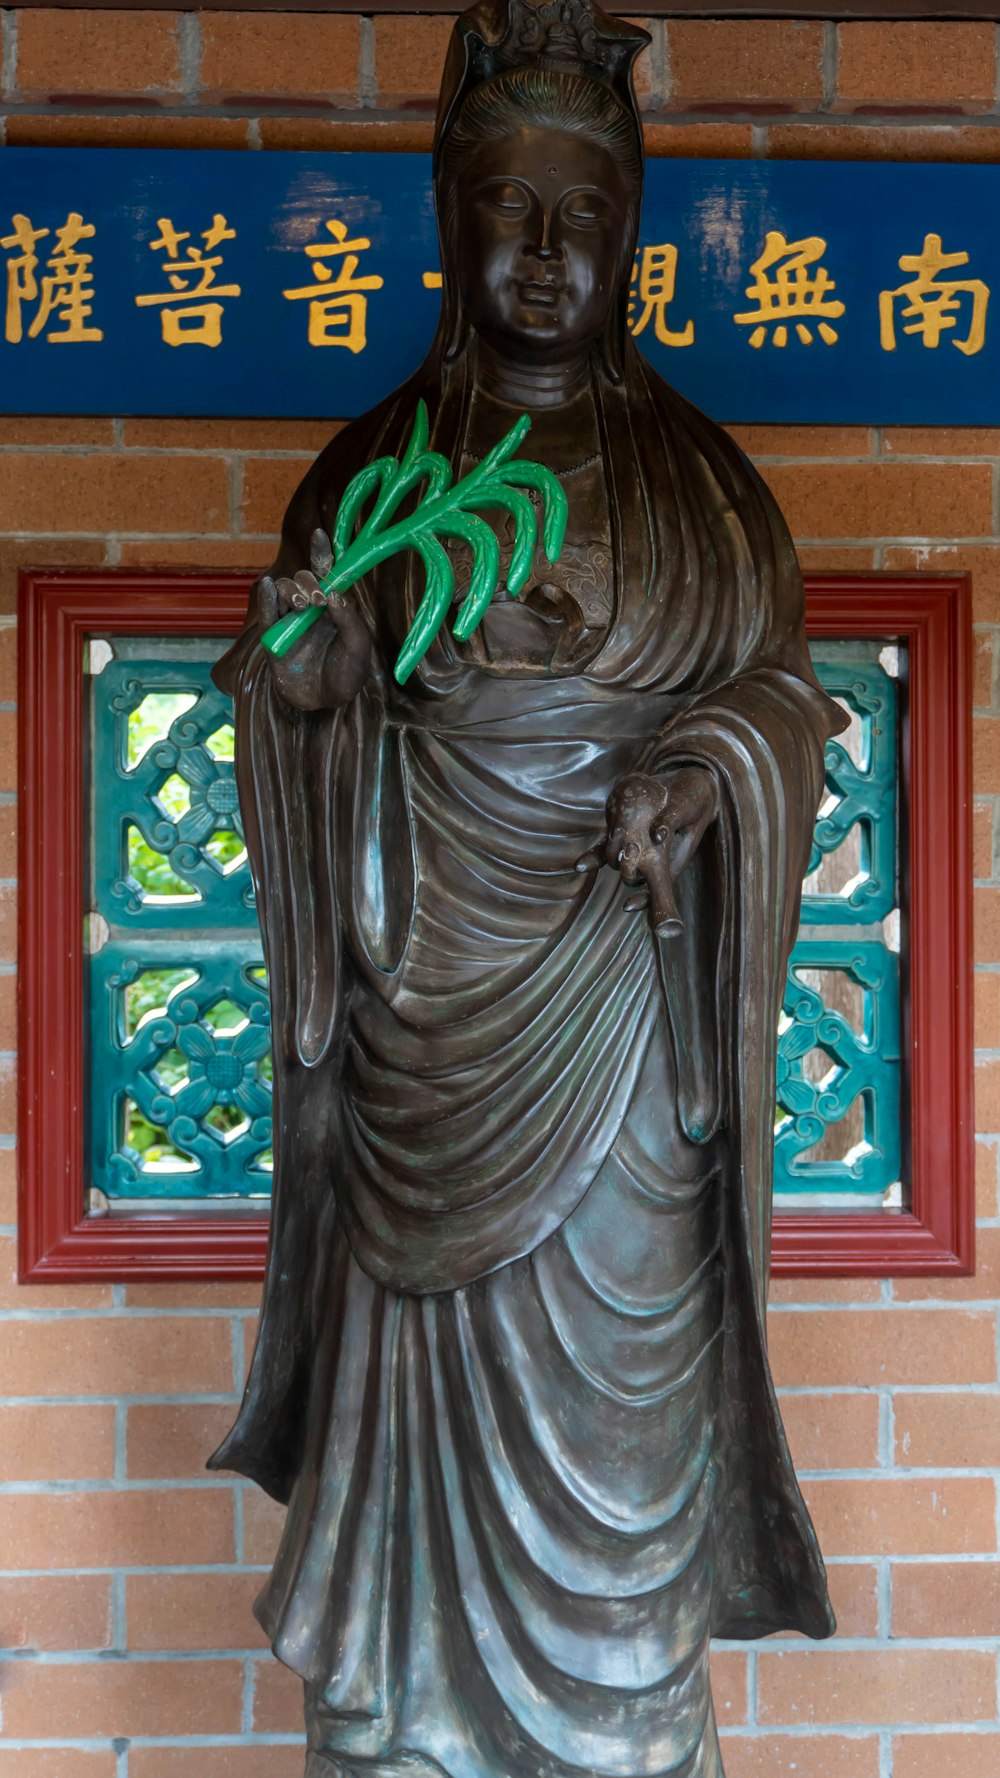 a statue of a person holding a plant